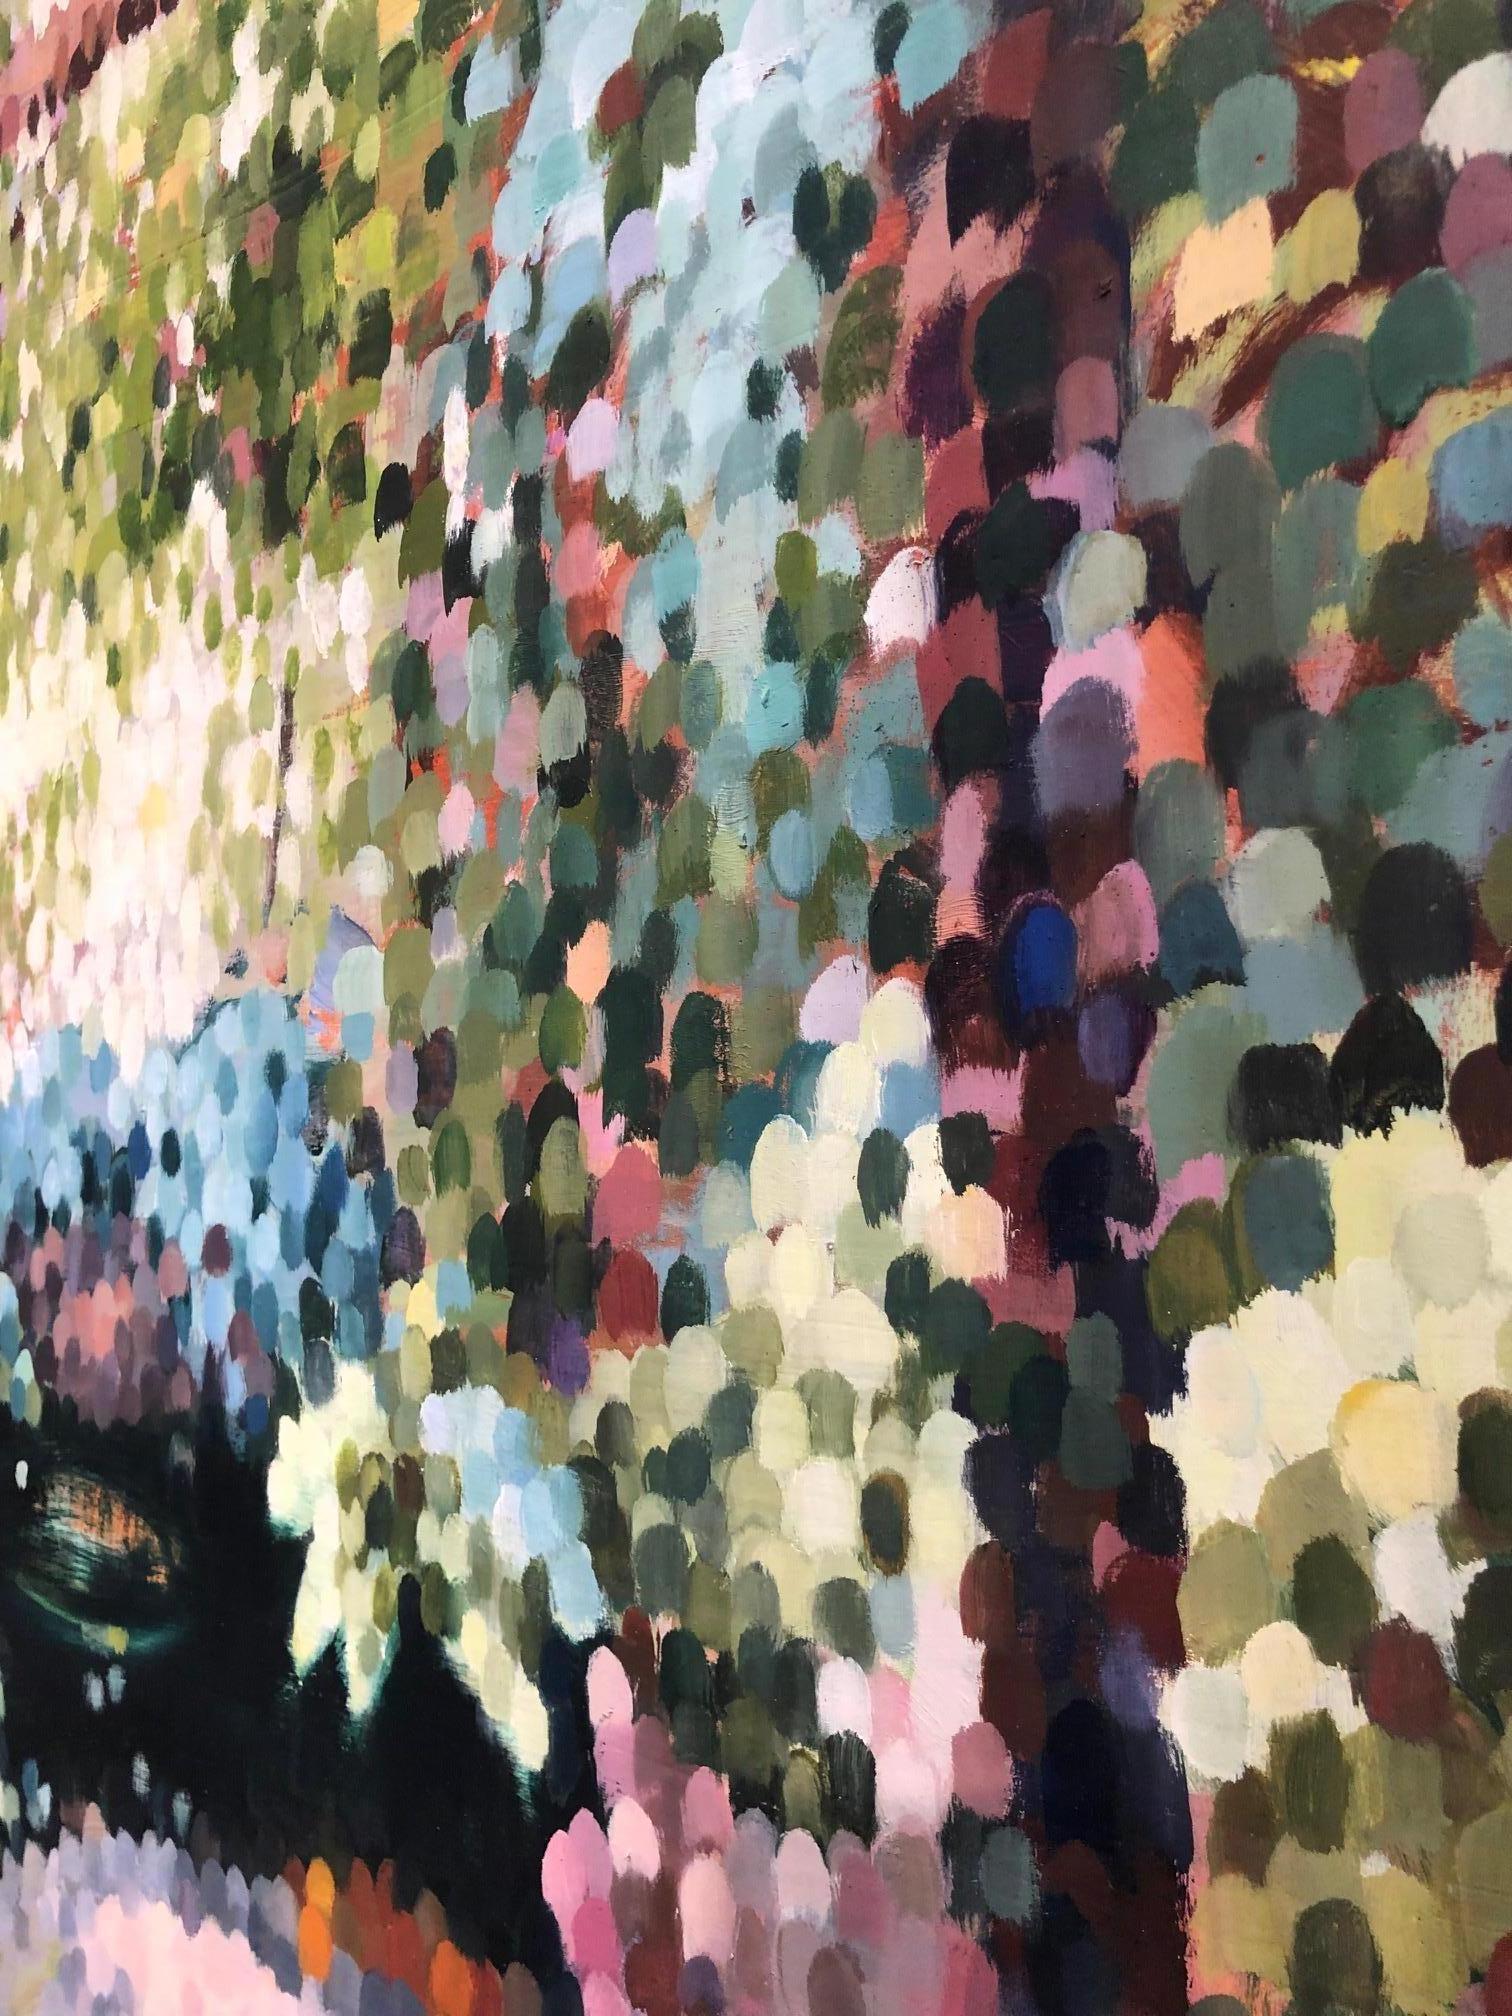 Contemporary and mysterious oil painting inspired by 'La Grande Serre' gardens in Paris, France, at dusk. The lush work in forrest greens with blues and other touches of viivid color throughout is a wonderfully complex painting with a glowing center